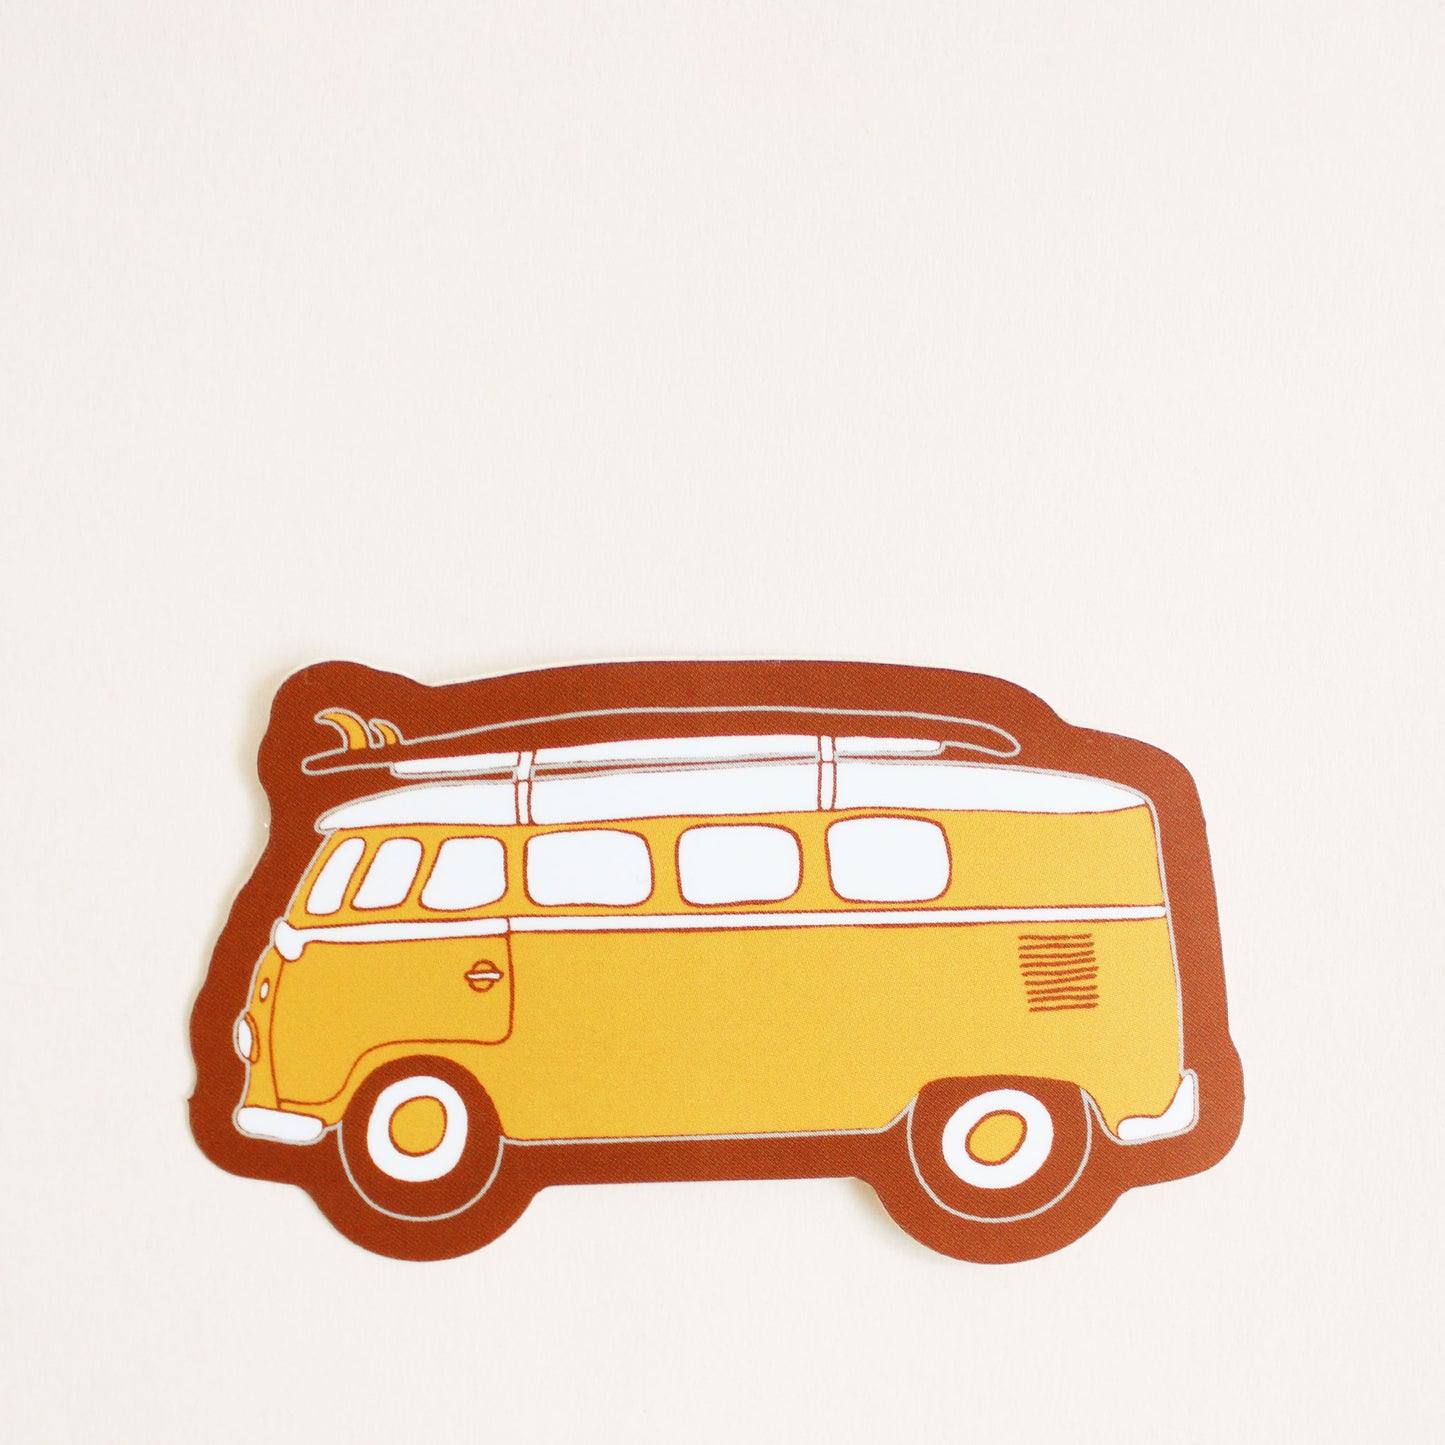 This vinyl sticker has a classic daffodil yellow VW Bug with a surfboard fastened on top, providing that classic beach cruiser vibe. The sticker has tawny brown bubble border